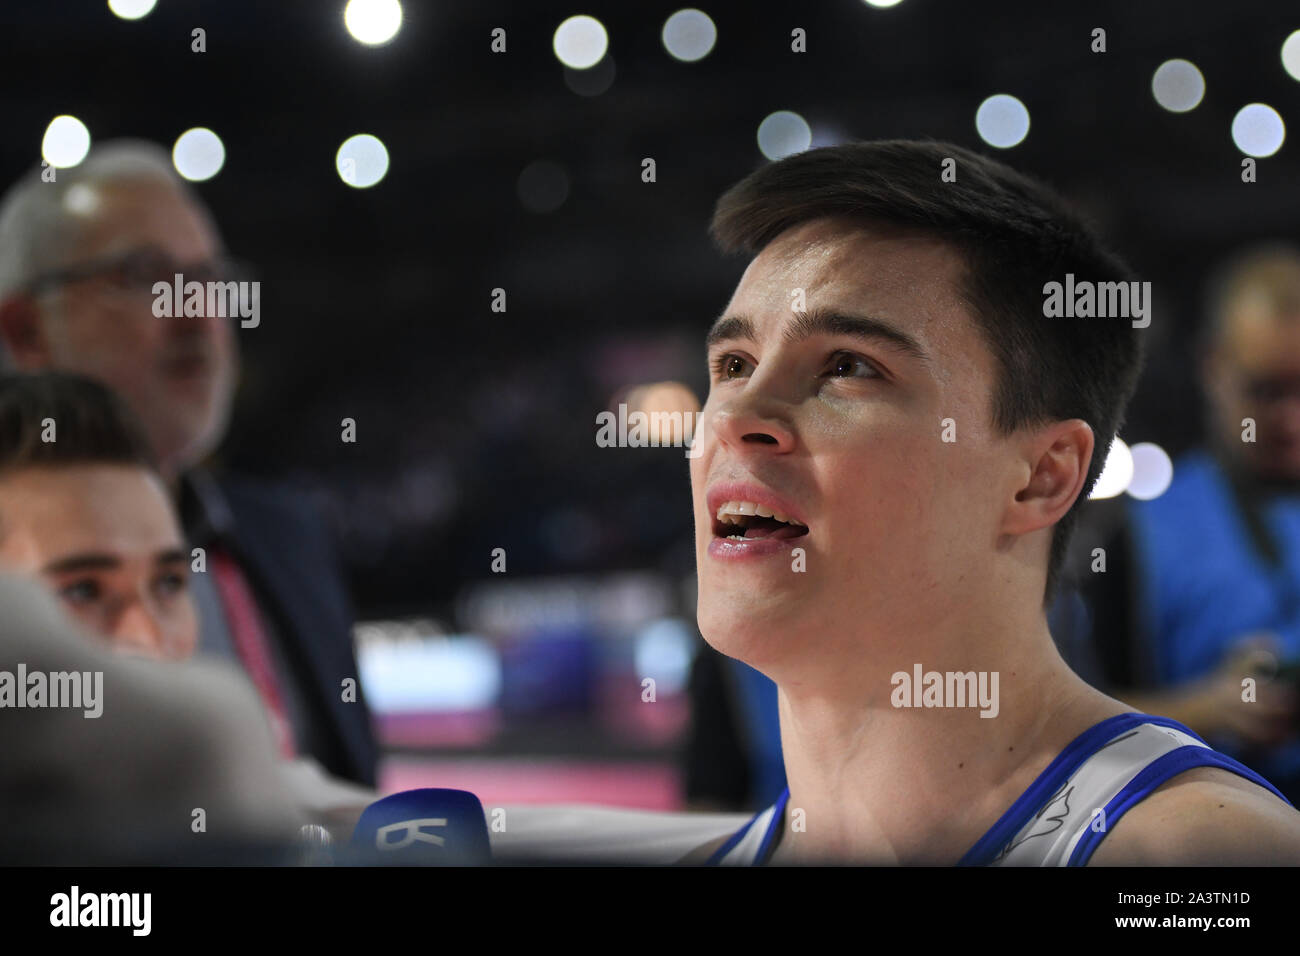 October 9, 2019: NIKITA NAGORNYY from Russia waits to see his score that will determine the winning team during the Team Final competition held in the Hanns-Martin-Schleyer-Halle in Stuttgart, Germany. Credit: Amy Sanderson/ZUMA Wire/Alamy Live News Stock Photo